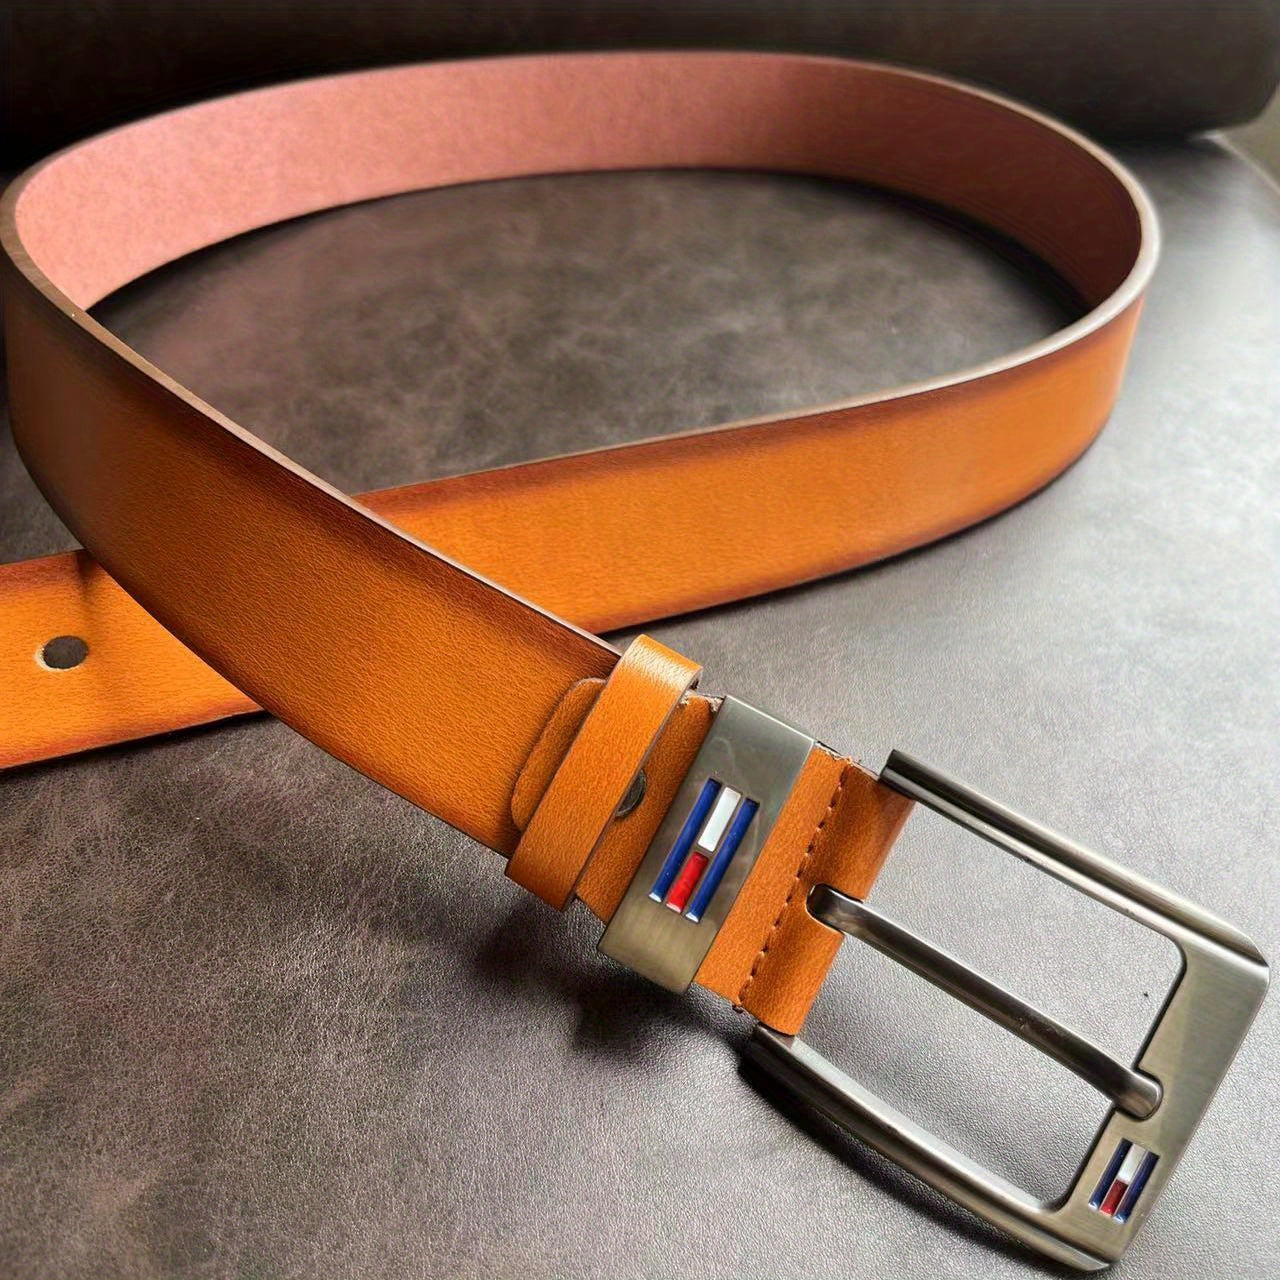 Upgrade Your Look With This Stylish Men's Casual Belt Suitable For Business